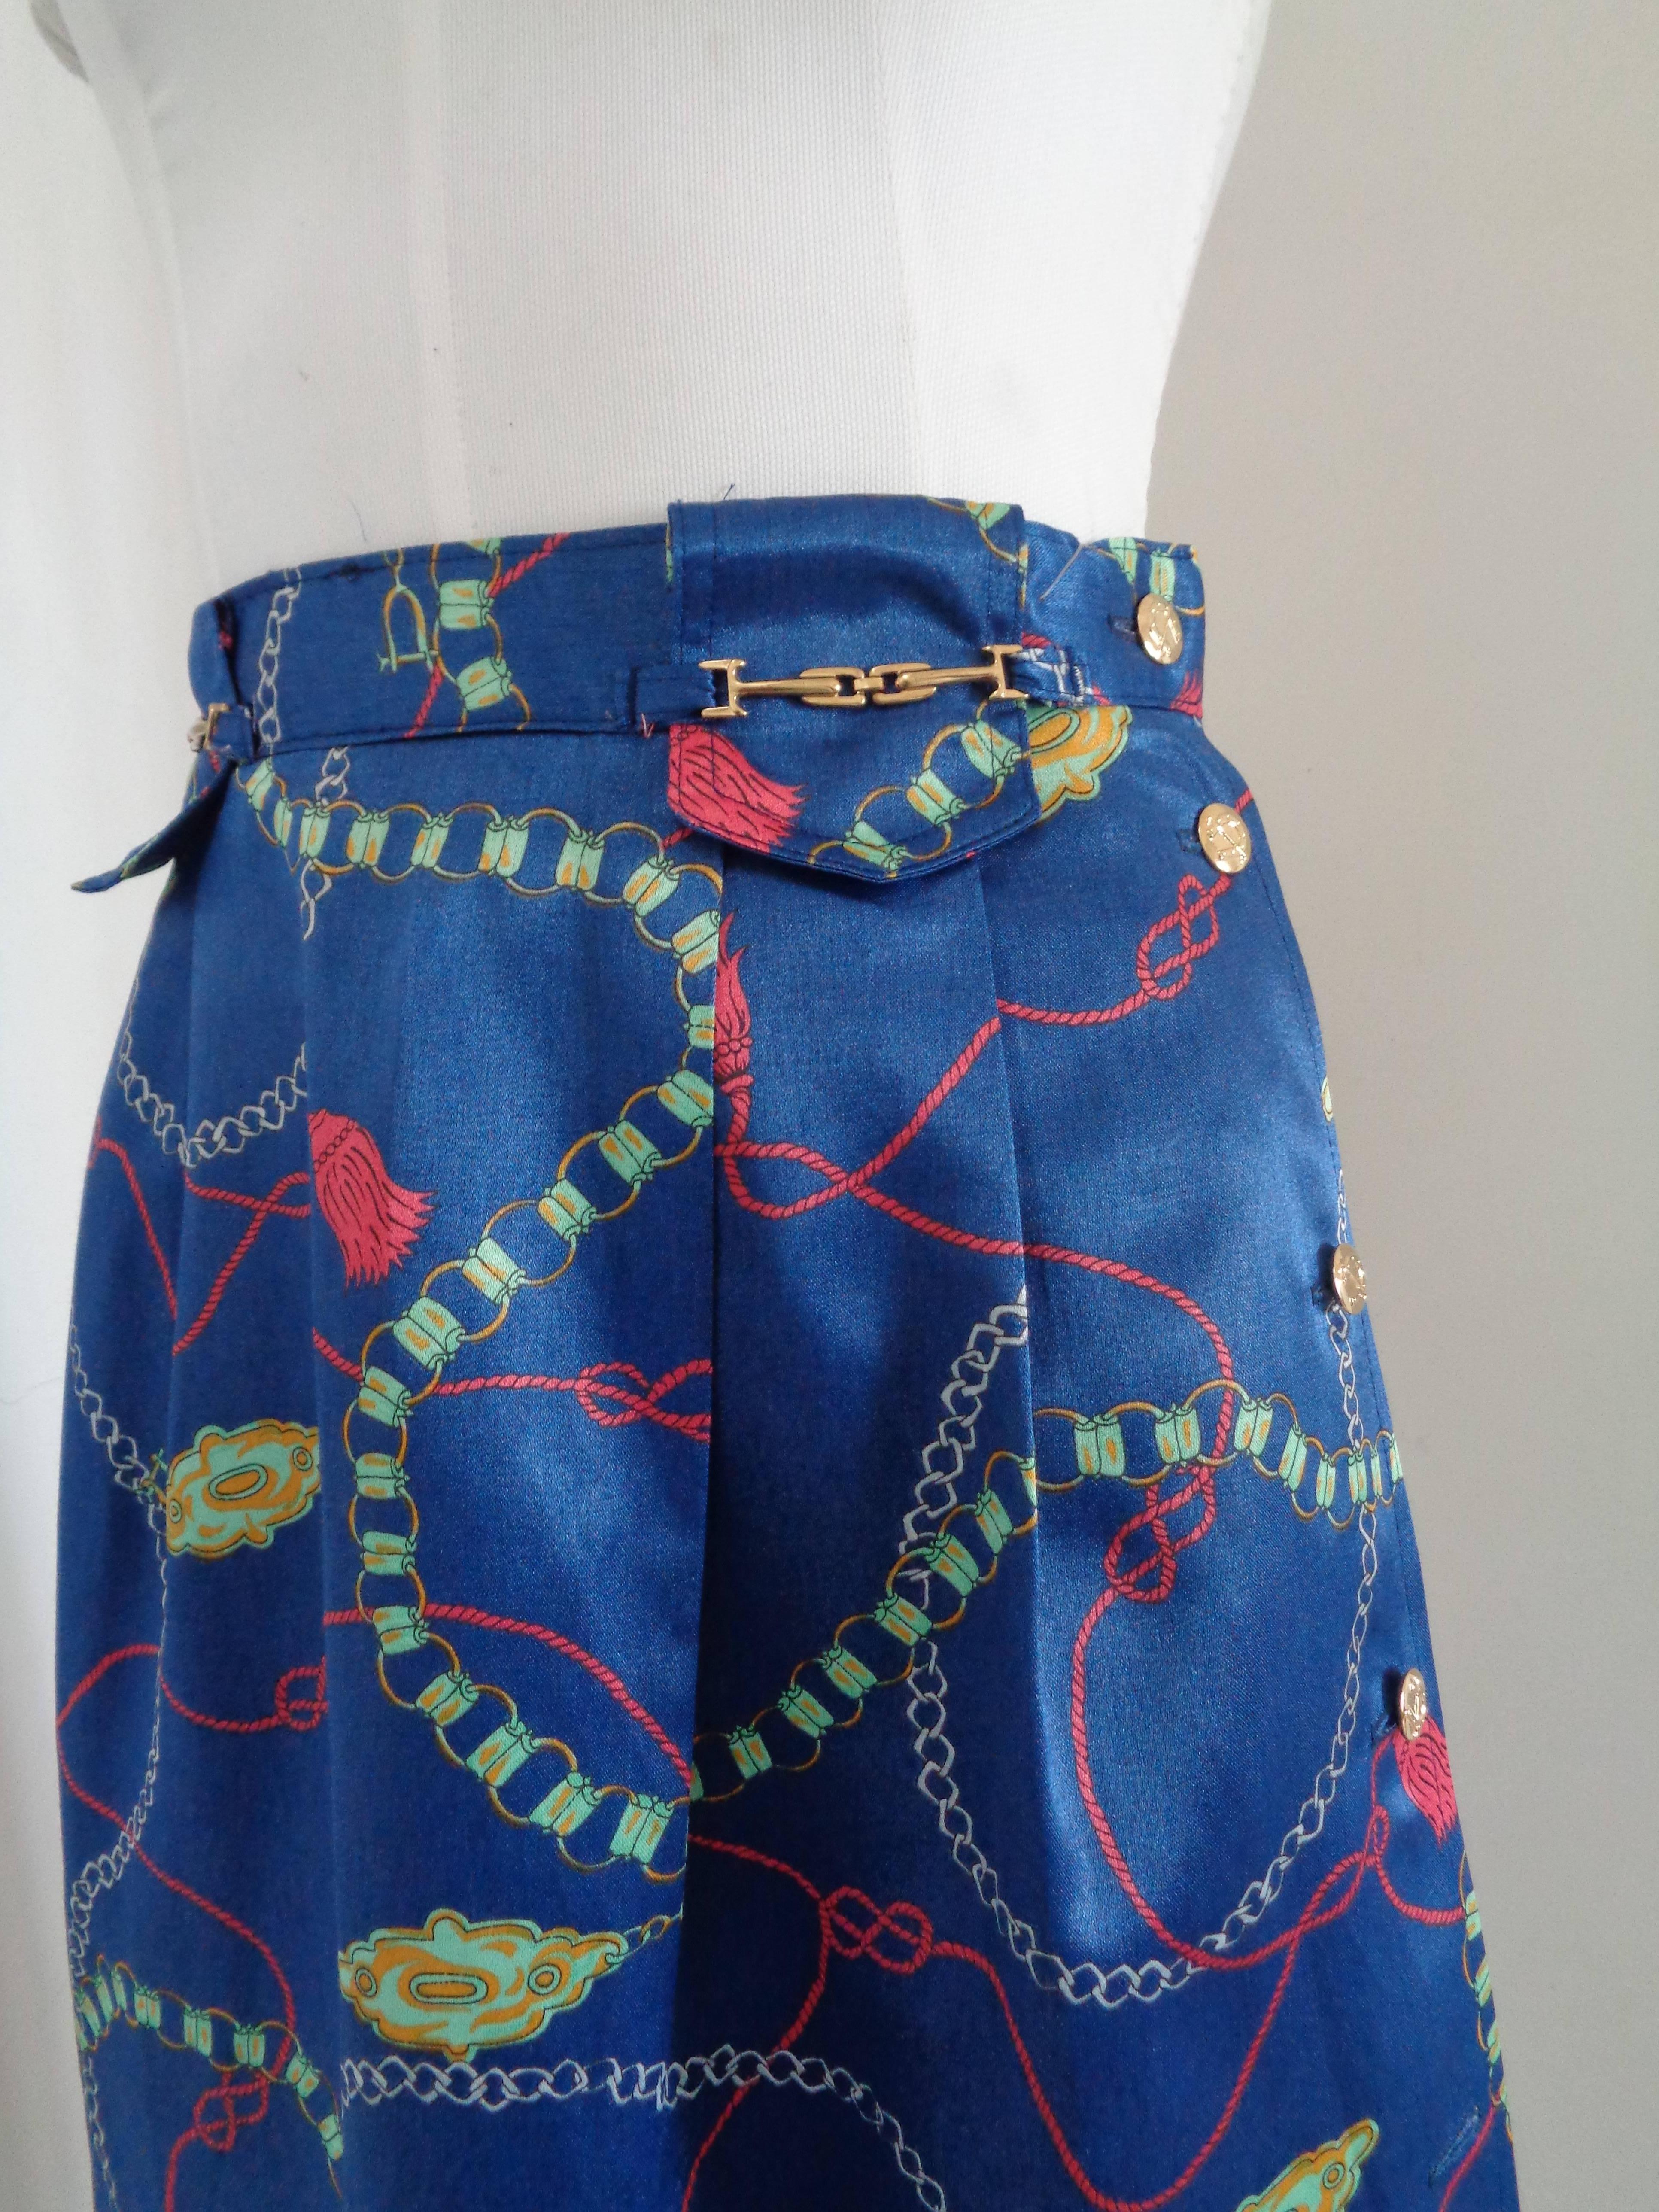 Marisel Ama Deus Blu multi Vintage Skirt

With gold tone hardware

totally made in italy in italian size range 44

Composition: Cotton
Lining Acetate, viscose